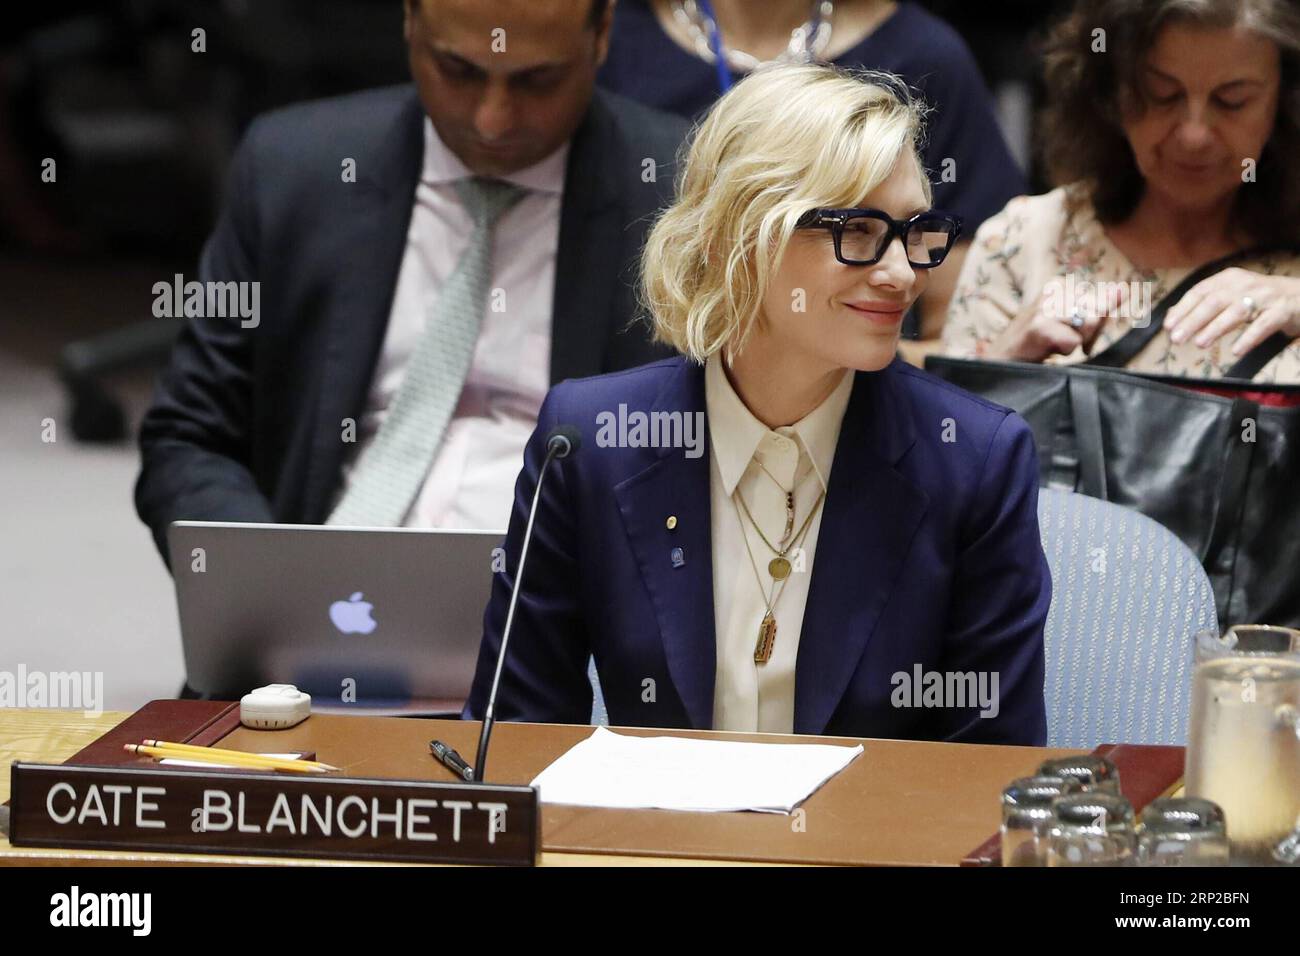 (180828) -- UNITED NATIONS, Aug. 28, 2018 -- Cate Blanchett (front), United Nations Refugee Agency Goodwill Ambassador, attends the Security Council meeting on the situation in Myanmar and the Rohingya refugee crisis, at the UN headquarters in New York, Aug. 28, 2018. Cate Blanchett on Tuesday asked for efforts to help Rohingya refugees in Bangladesh and to create the right conditions for their return to Myanmar. ) UN-SECURITY COUNCIL-MYANMAR-ROHINGYA CRISIS-CATE BLANCHETT LixMuzi PUBLICATIONxNOTxINxCHN Stock Photo